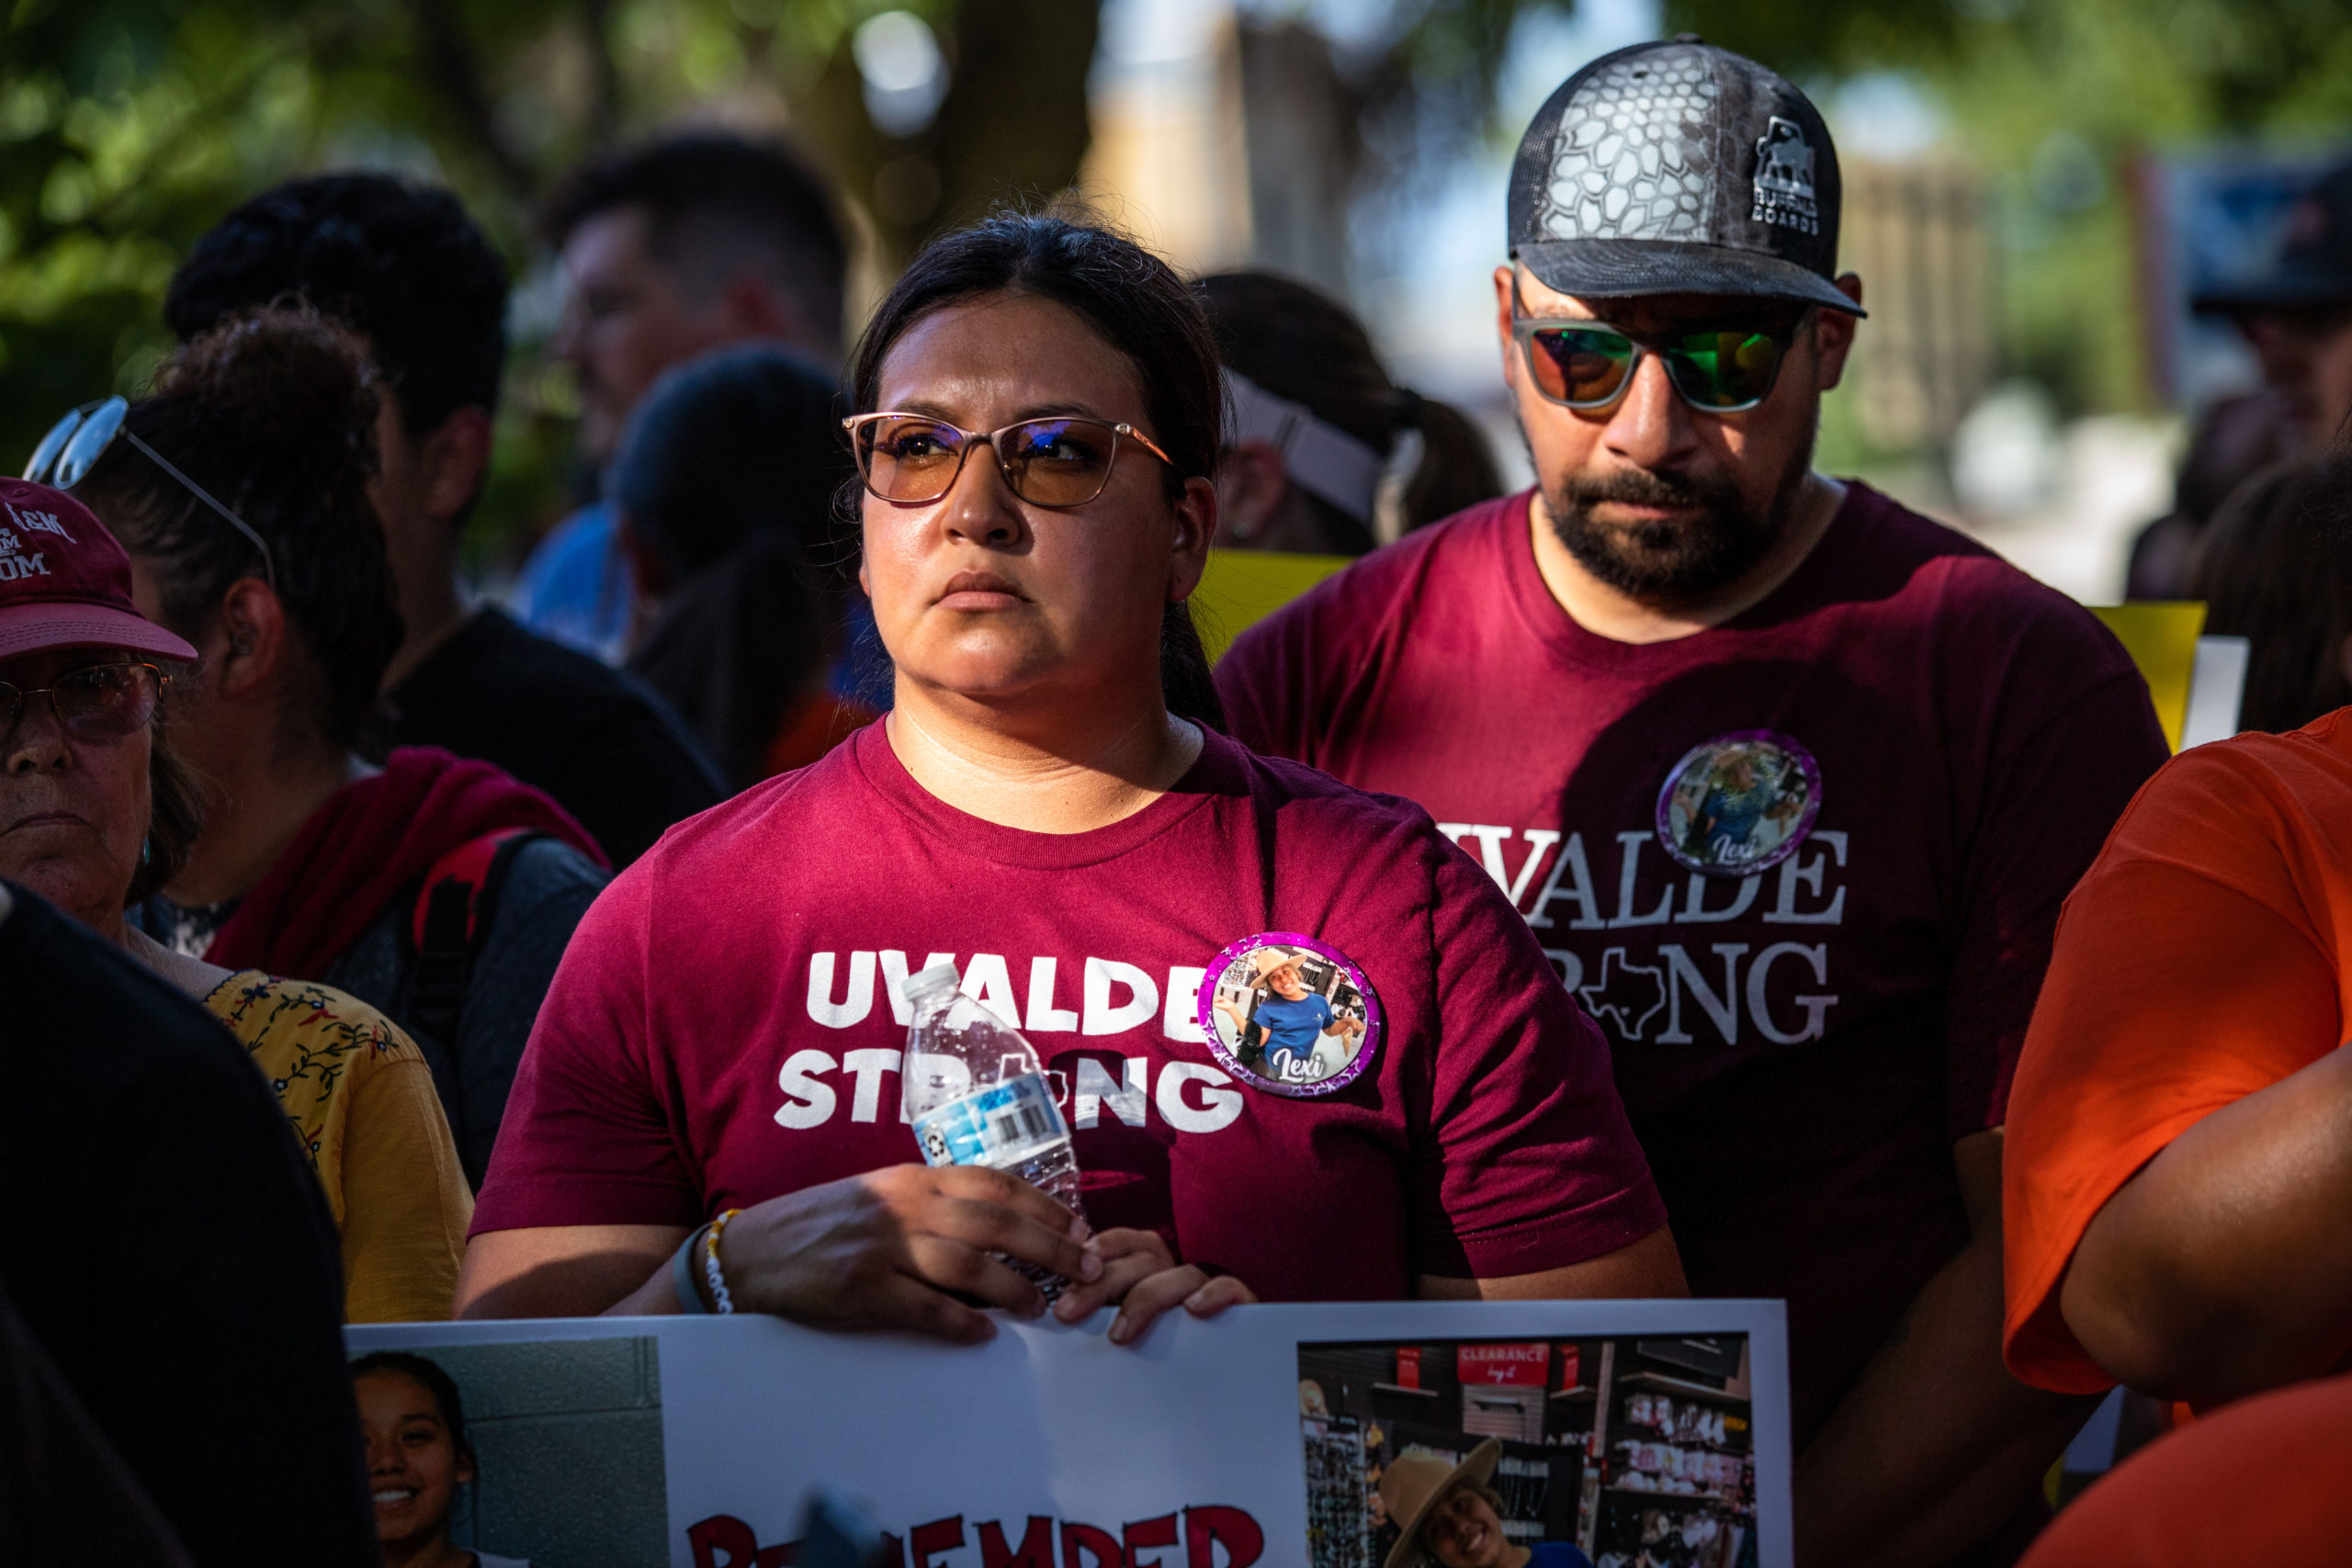 | THE PHRASE UVALDE STRONG HAS BECOME UBIQUITOUS IN TOWN SINCE THE MAY 24 SHOOTING KAYLEE GREENLEE BEALTEXAS OBSERVER | MR Online